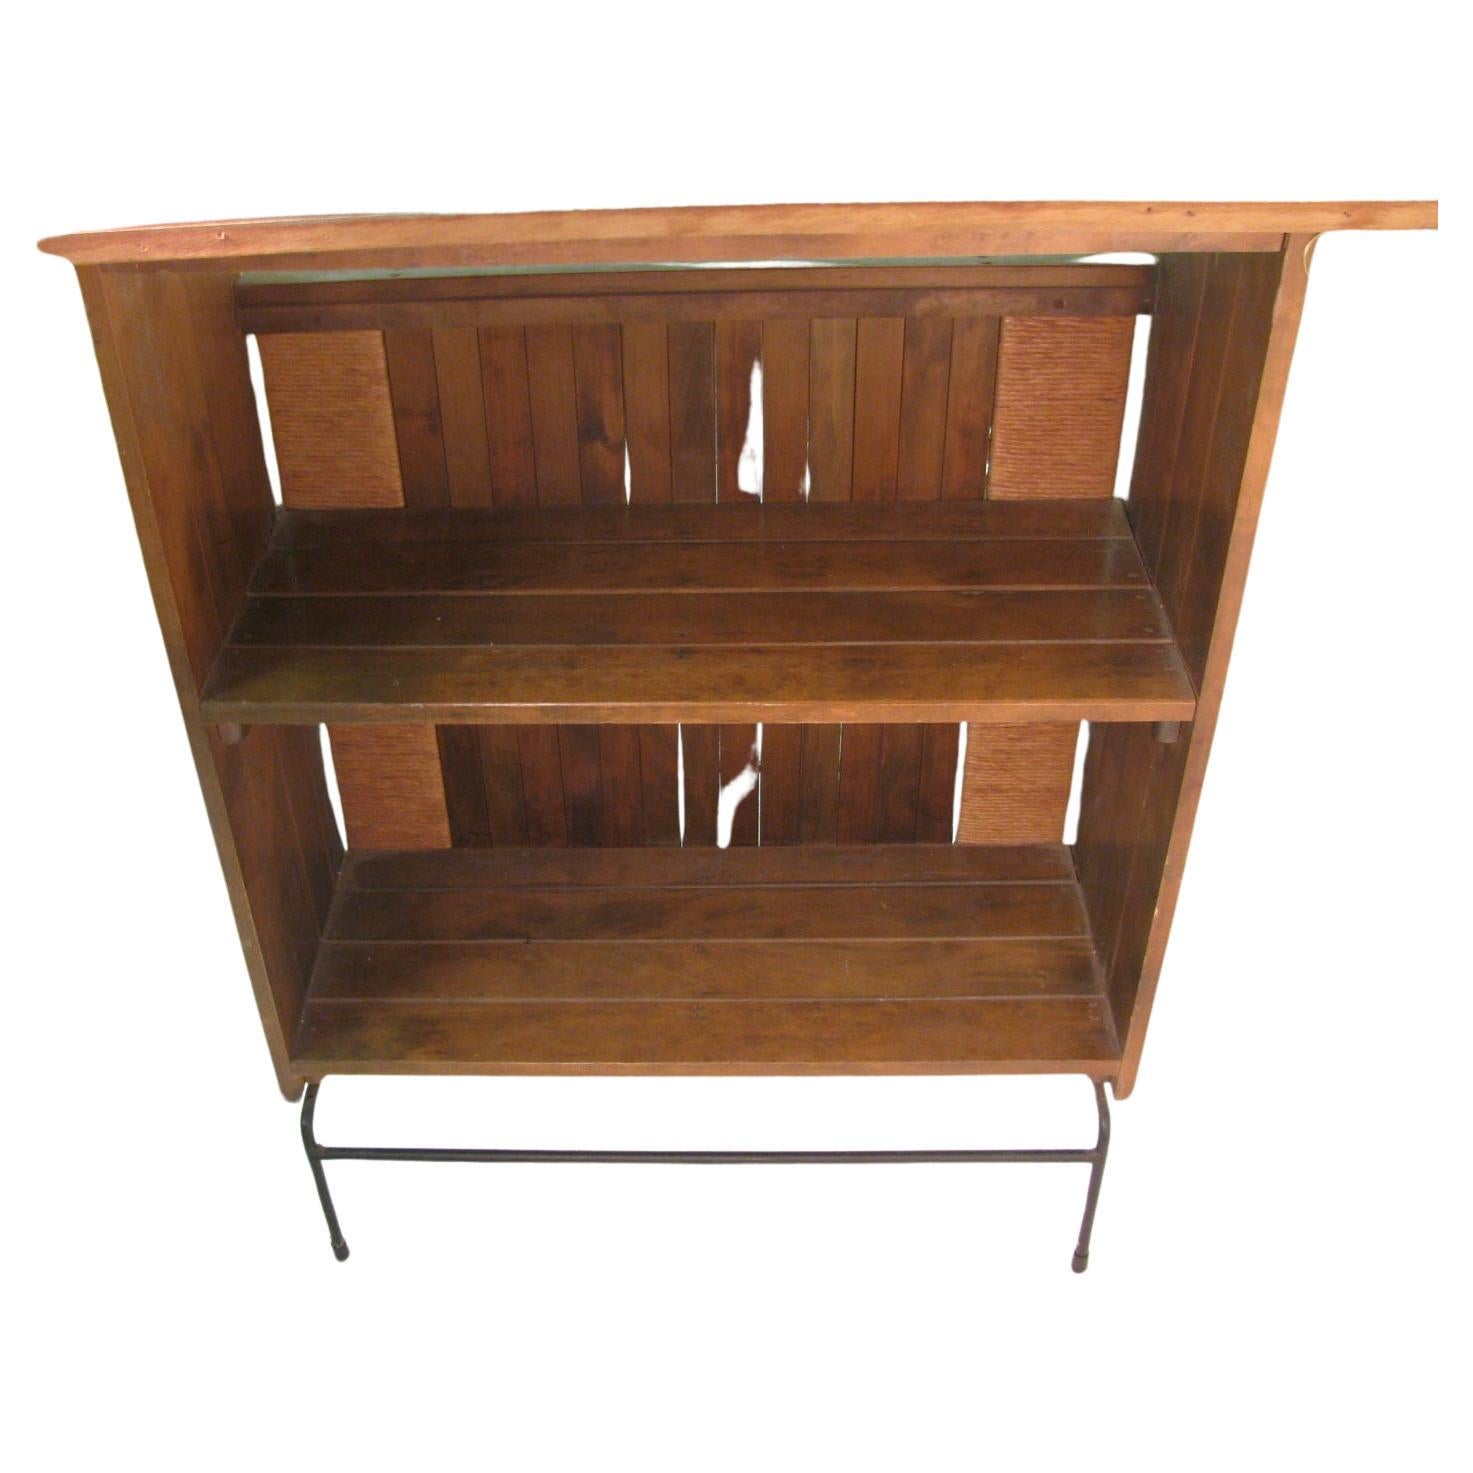 Fabulous dry bar with maple slats and raffia paper apron on the sides and a iron footrest. Top is a laminate that looks like wood in great condition original to the piece. Two storage shelves in the back of the bar. In excellent vintage condition